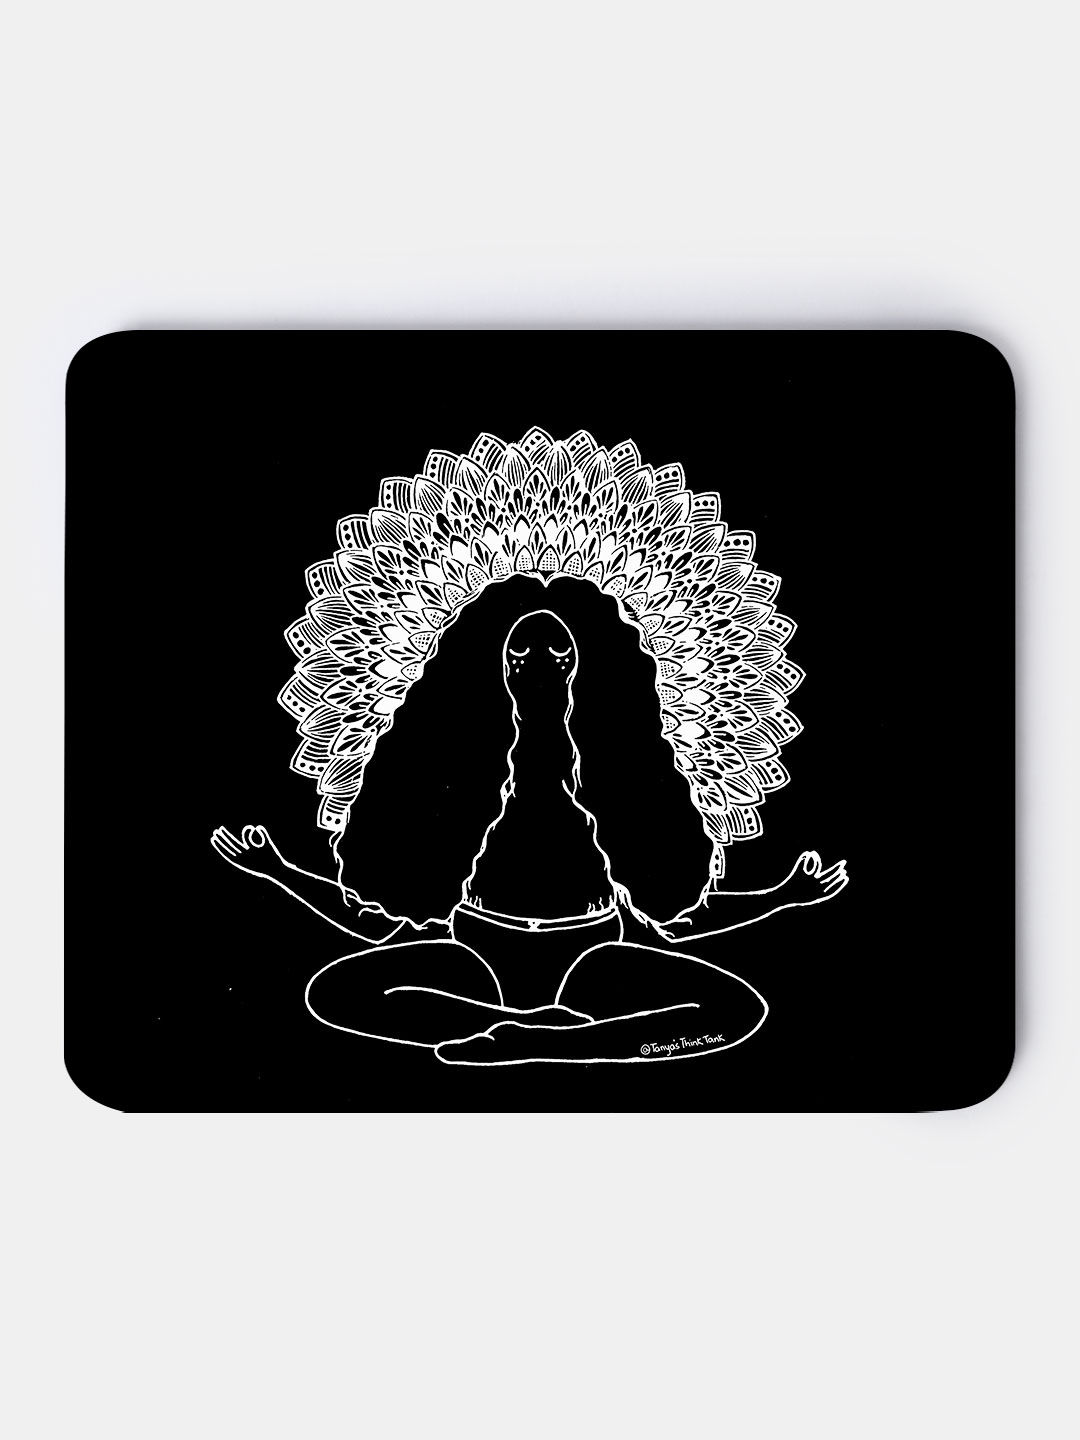 Buy Peace White - Macmerise Mouse Pad Mouse Pads Online